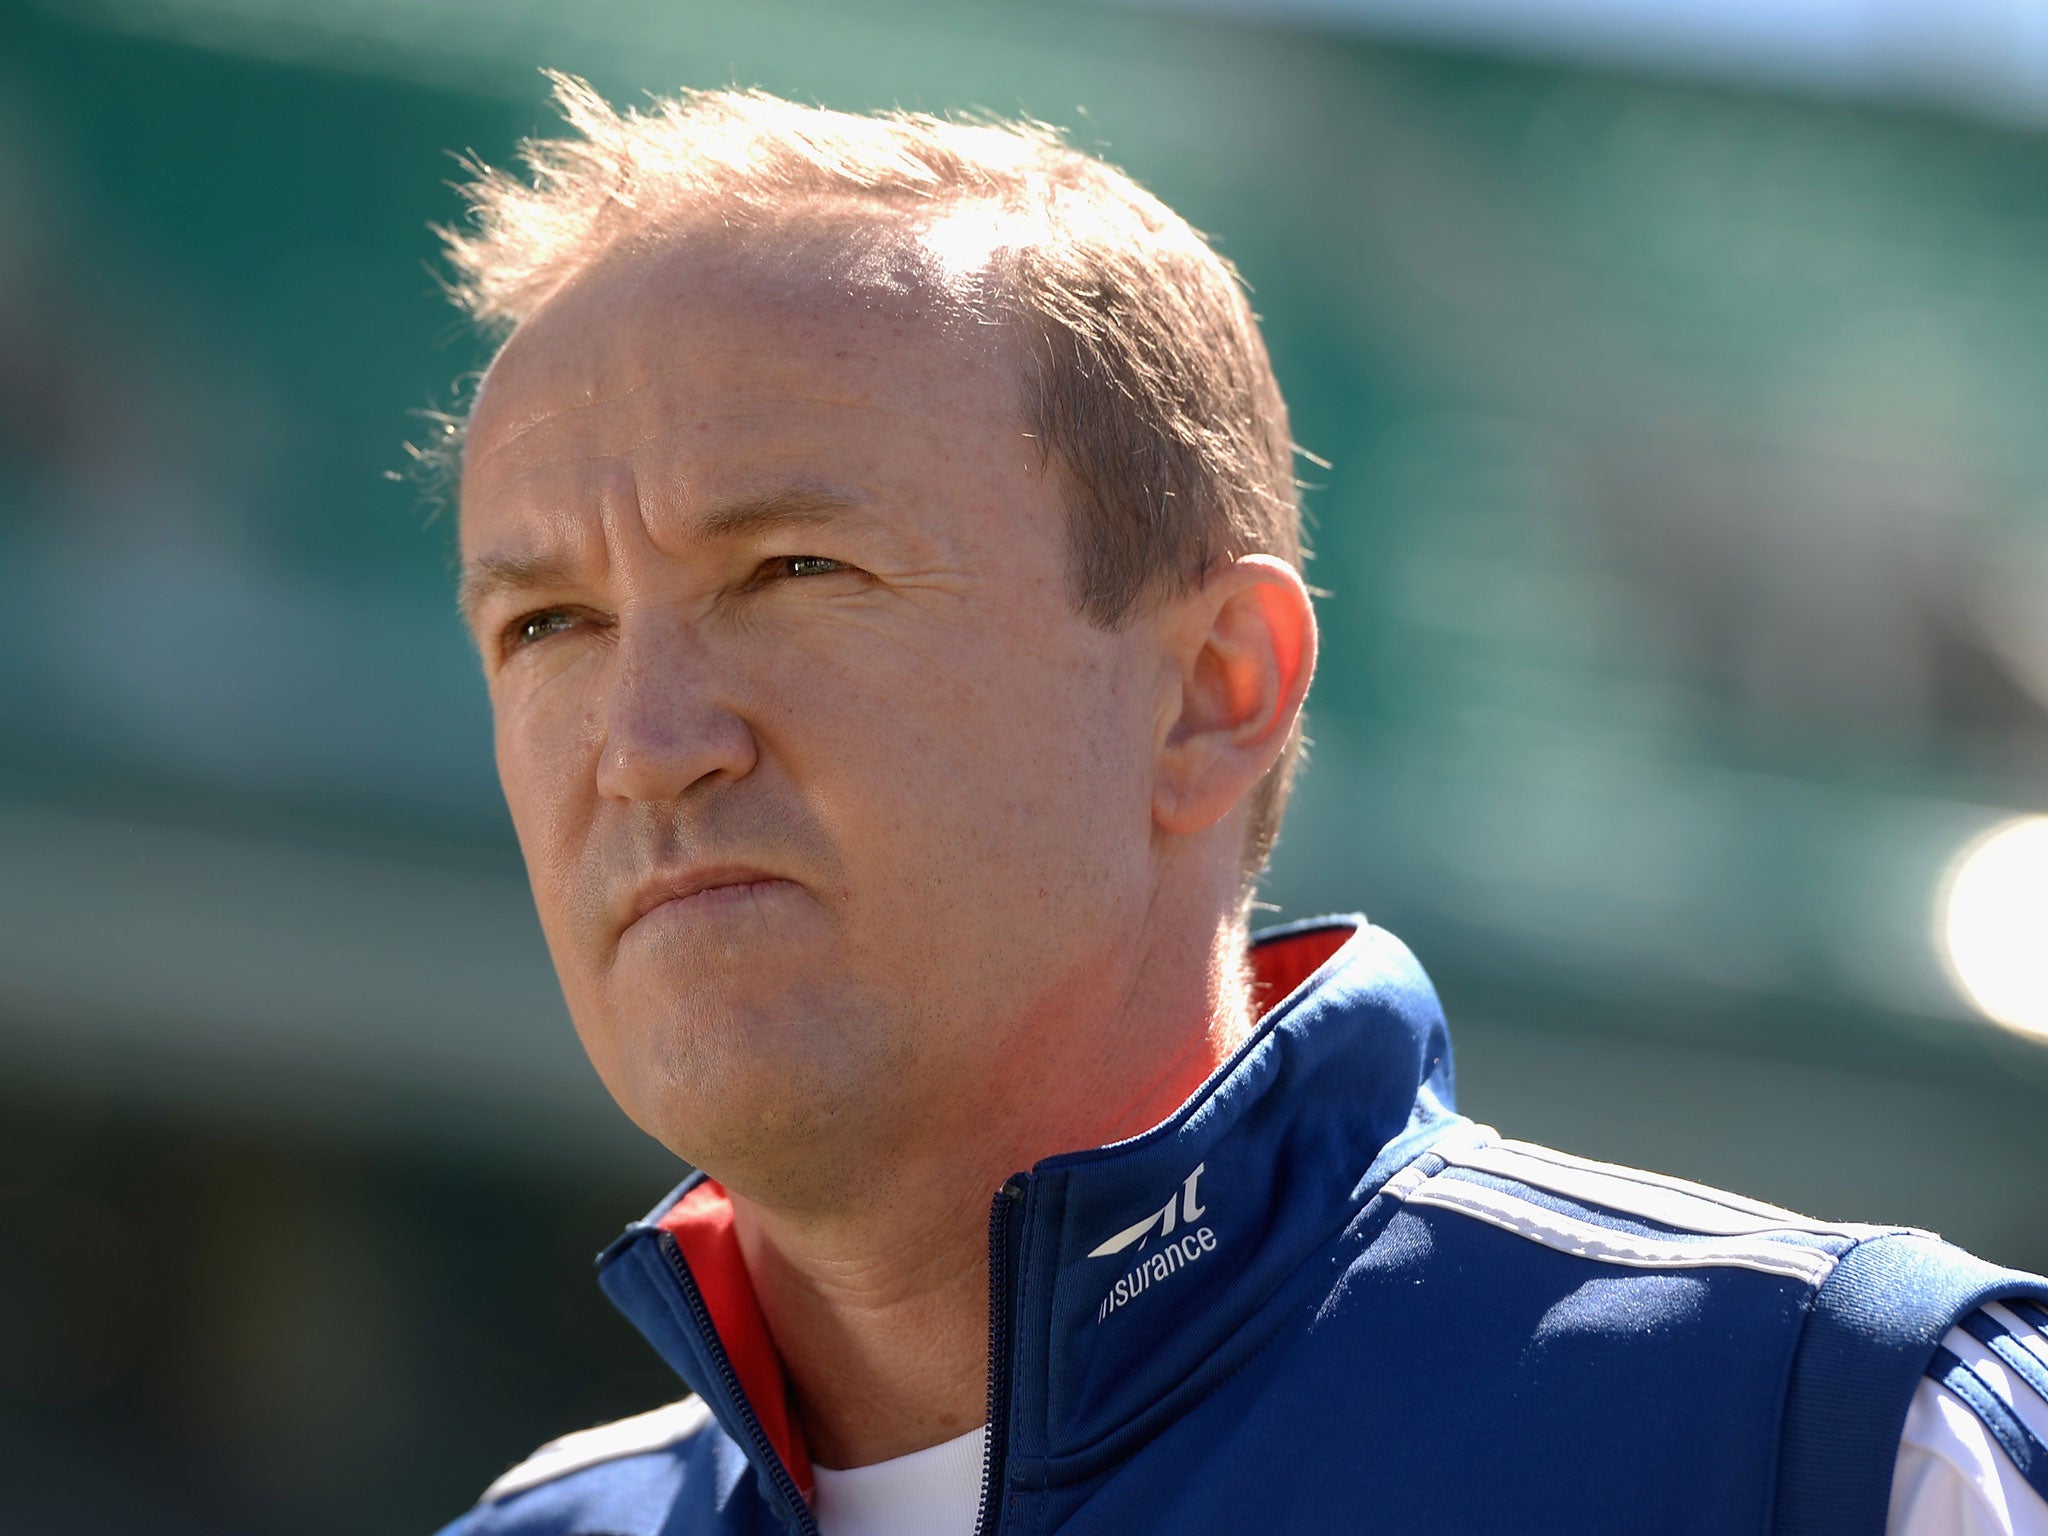 England coach Andy Flower will remain in his role as head coach after admitting he will be continuing with the backing of the ECB